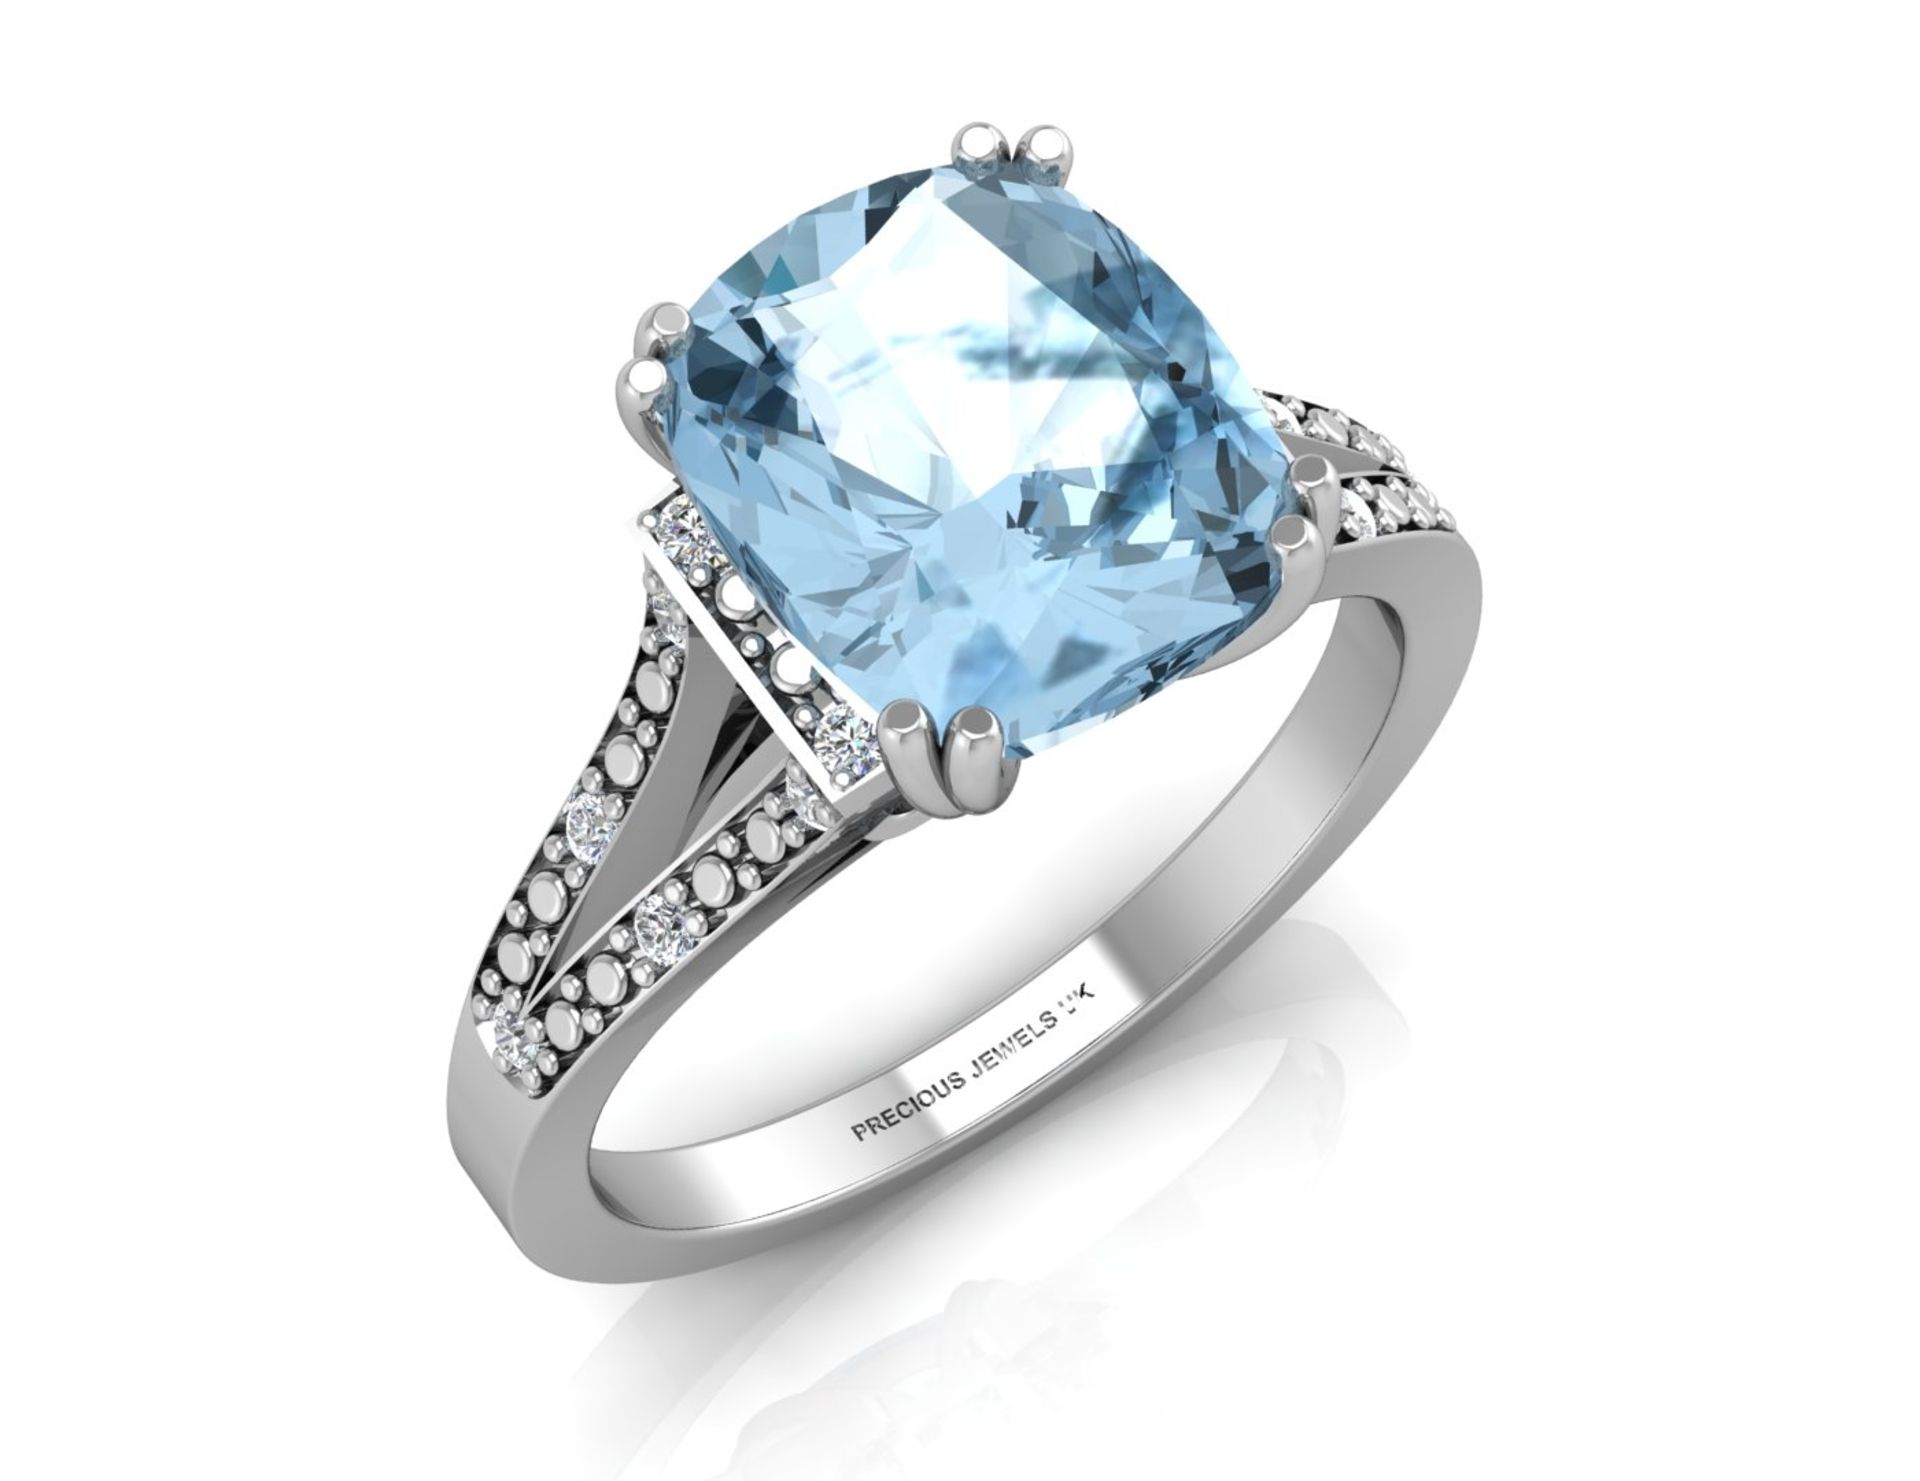 9ct White Gold Diamond And Blue Topaz Ring 0.07 Carats - Valued by GIE £2,945.00 - 9ct White Gold